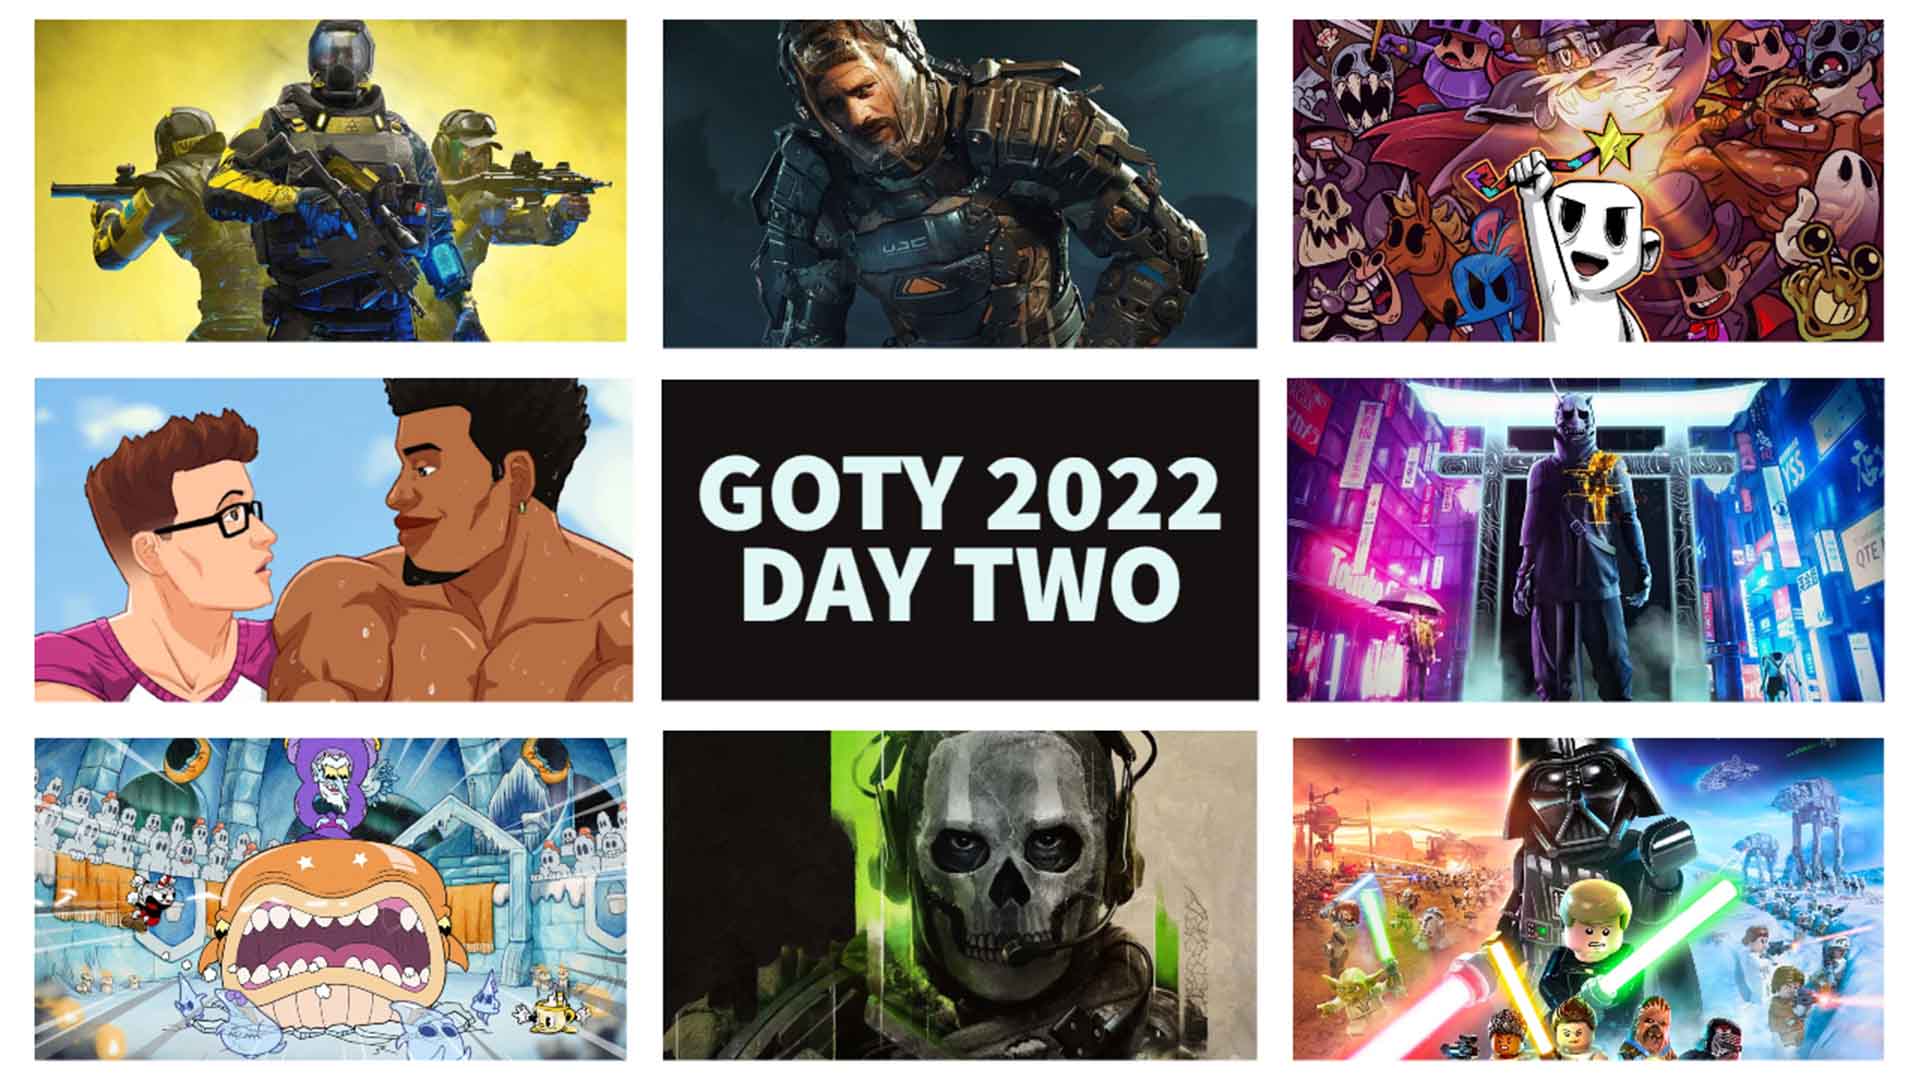 GOTY 2022 Podcast Day Two Best audio, Best visuals